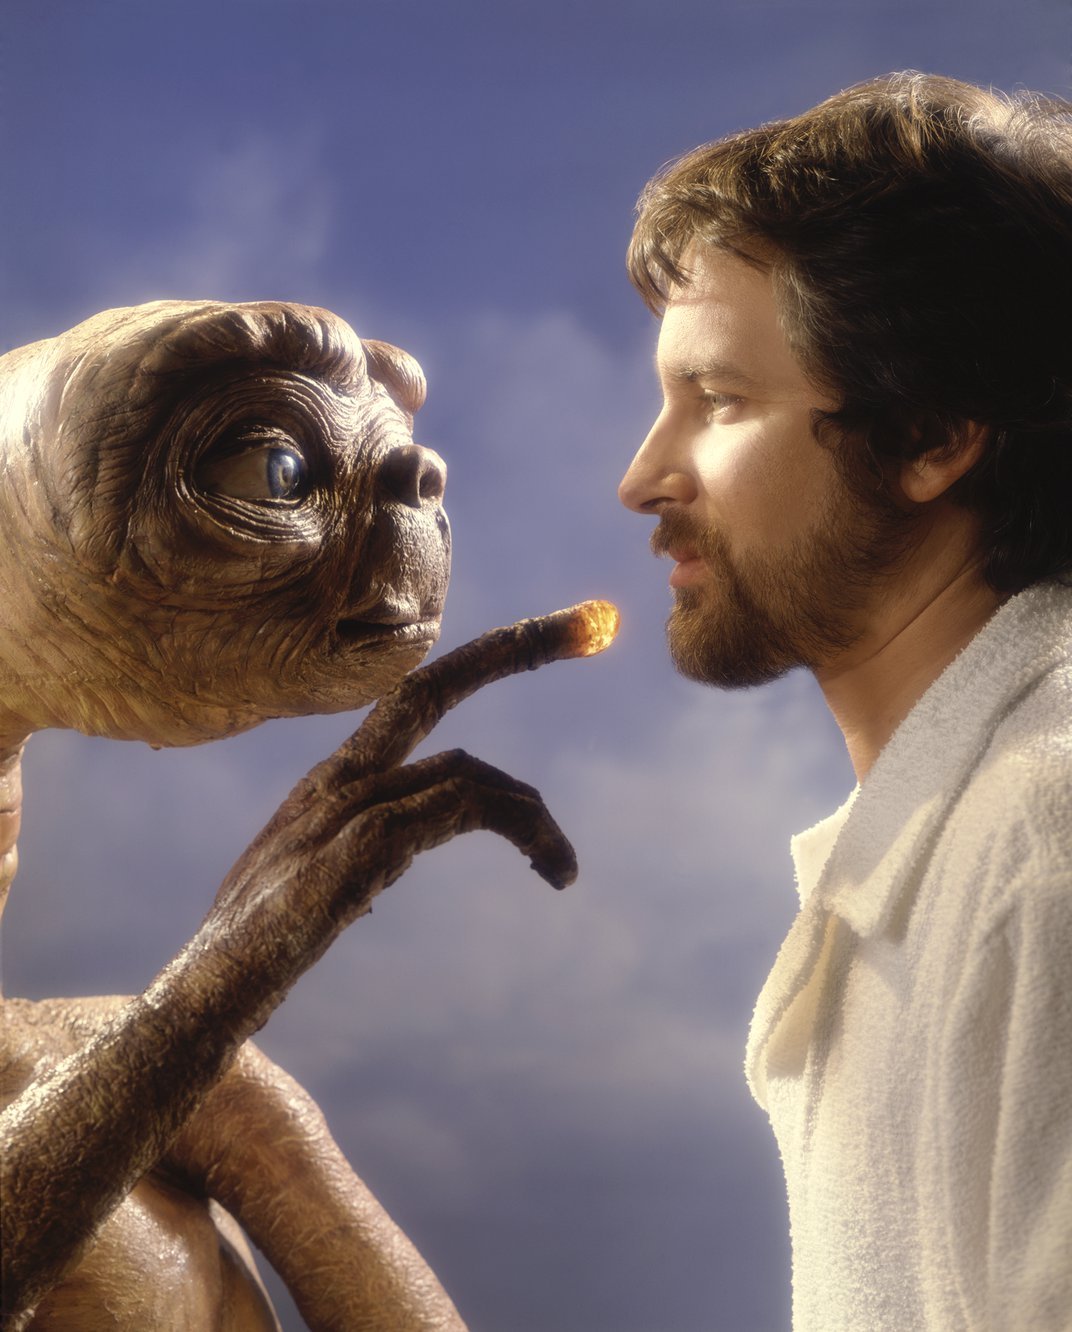 Spielberg with E.T.